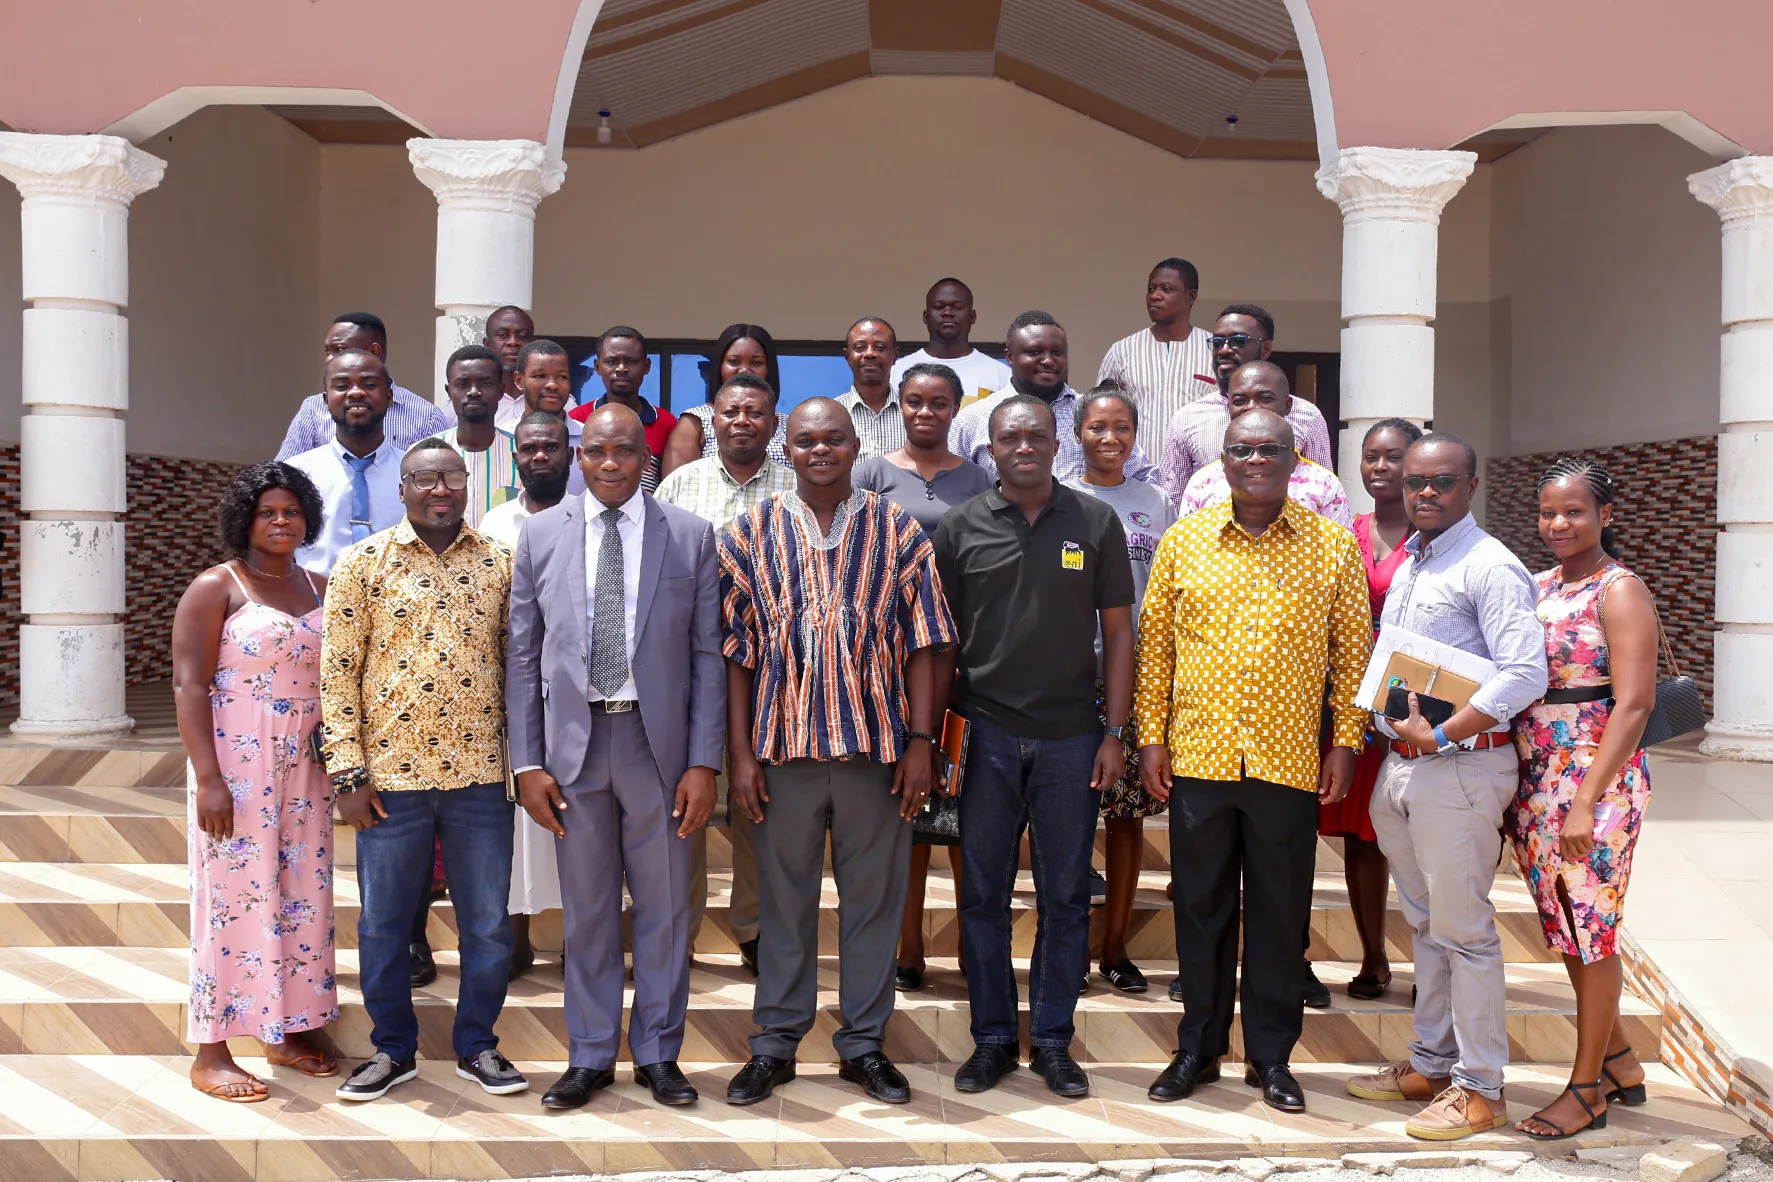 UENR Partners with Okuafo Pa Foundation to Train Agripreneurs at a Centre Near Dormaa Ahenkro, University of Energy and Natural Resources - Sunyani